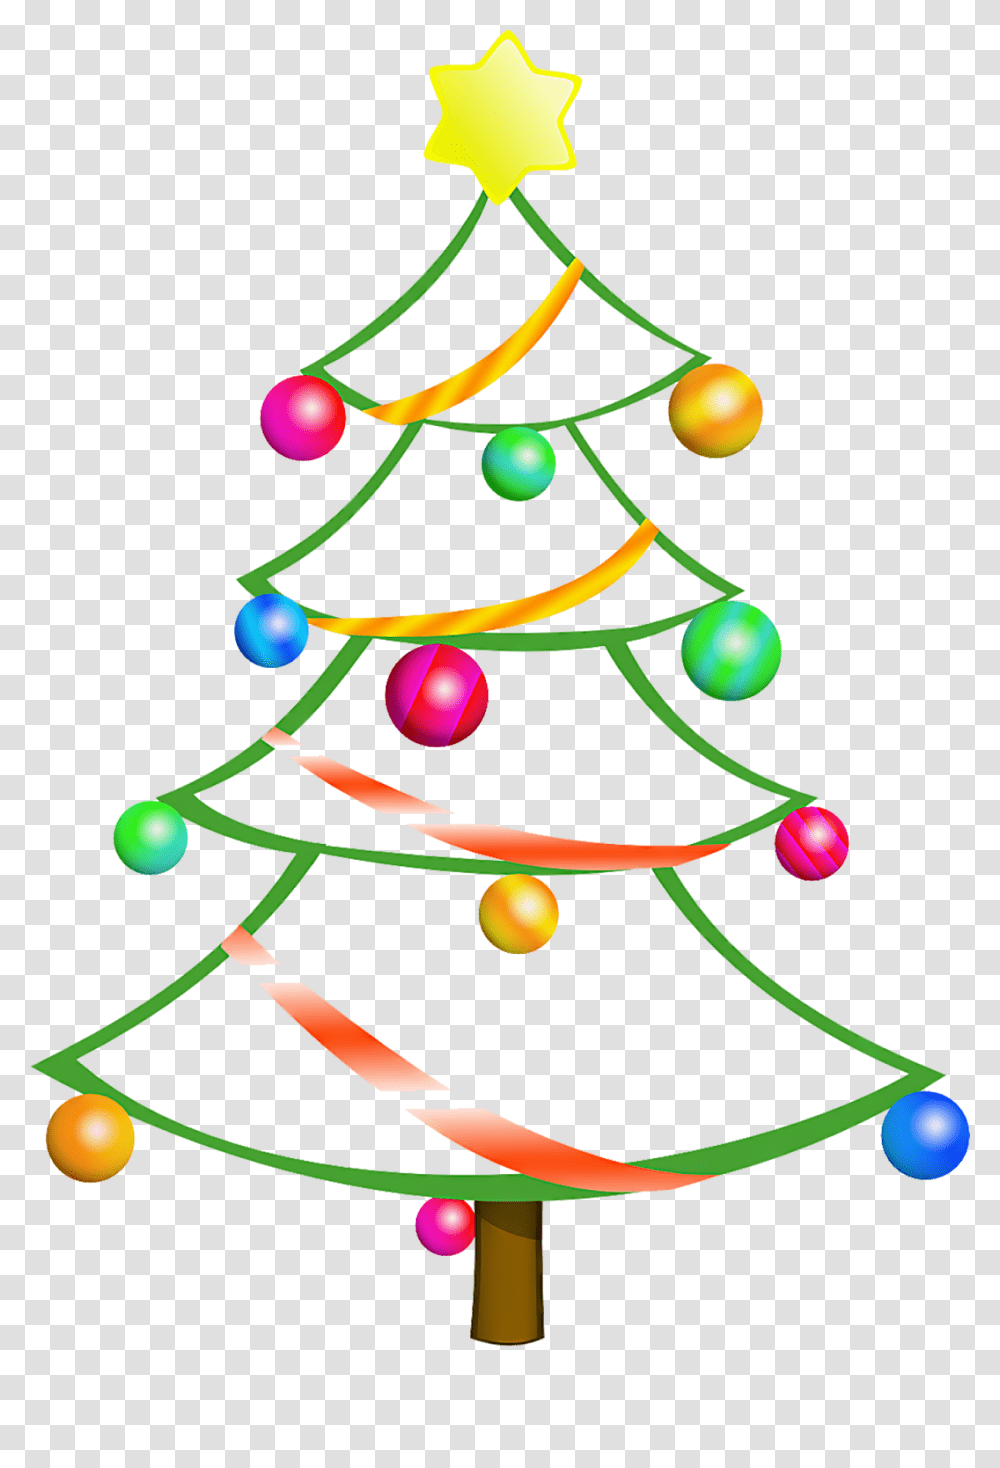 Merry Christmas Border Images, Tree, Plant, Ornament, Christmas Tree Transparent Png